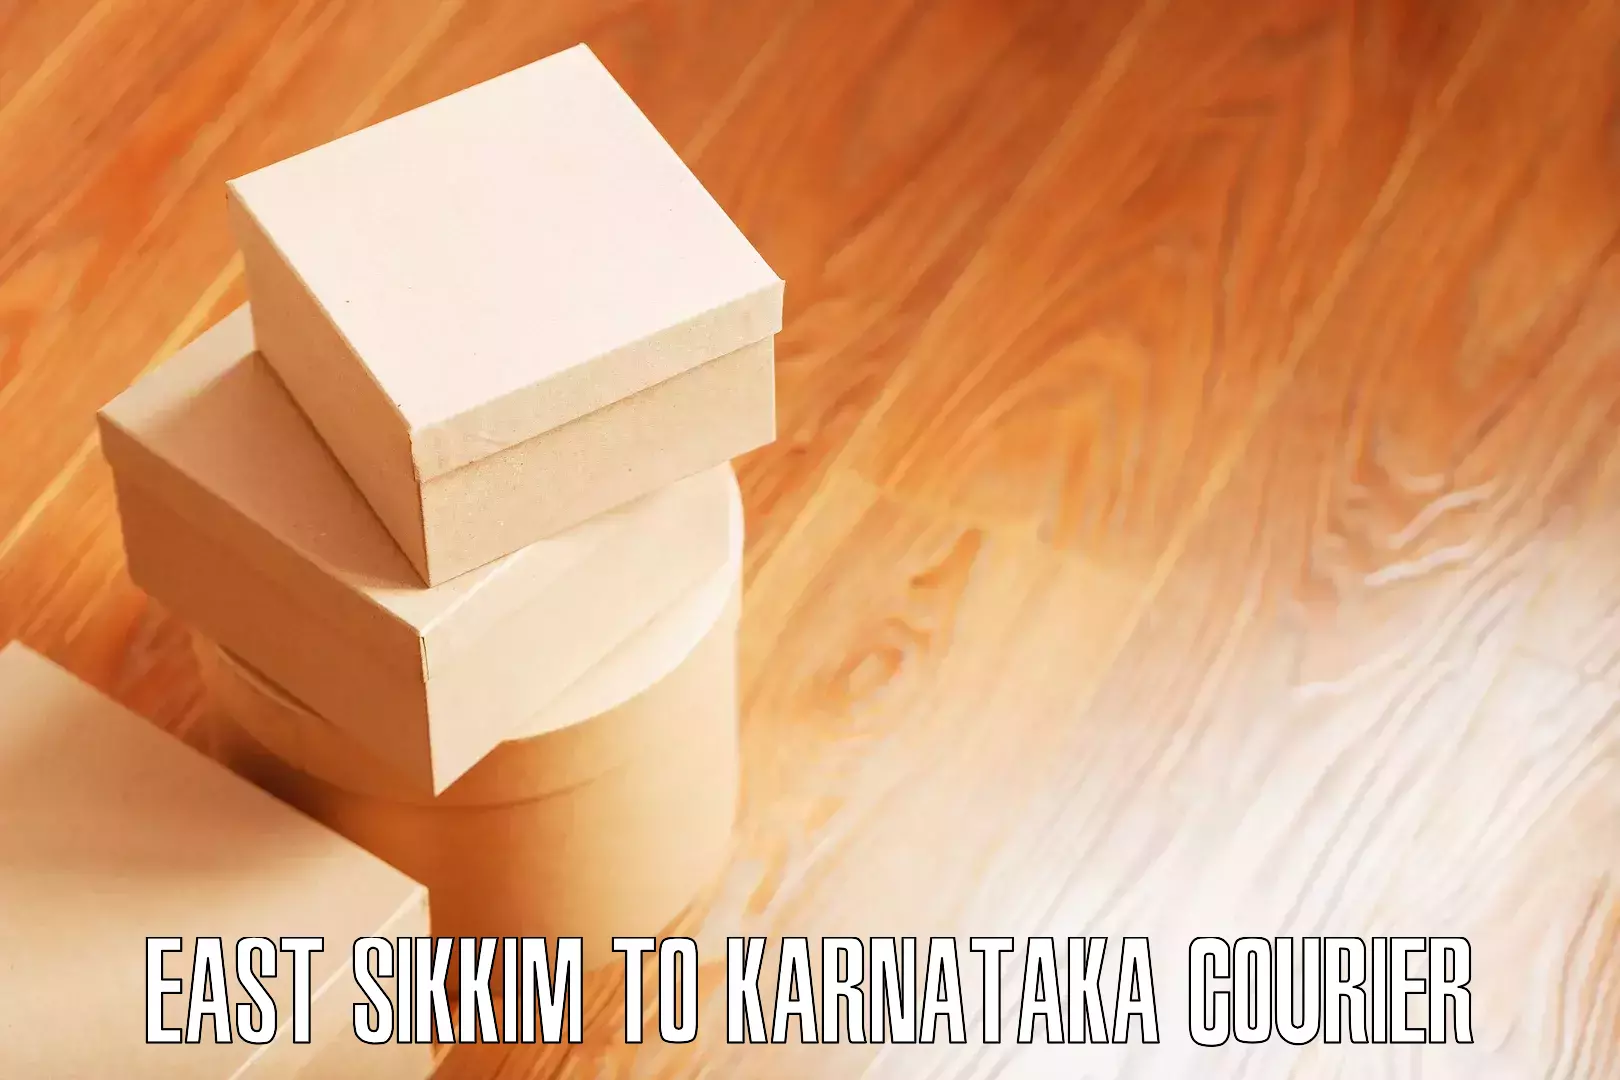 Efficient packing and moving East Sikkim to Karnataka